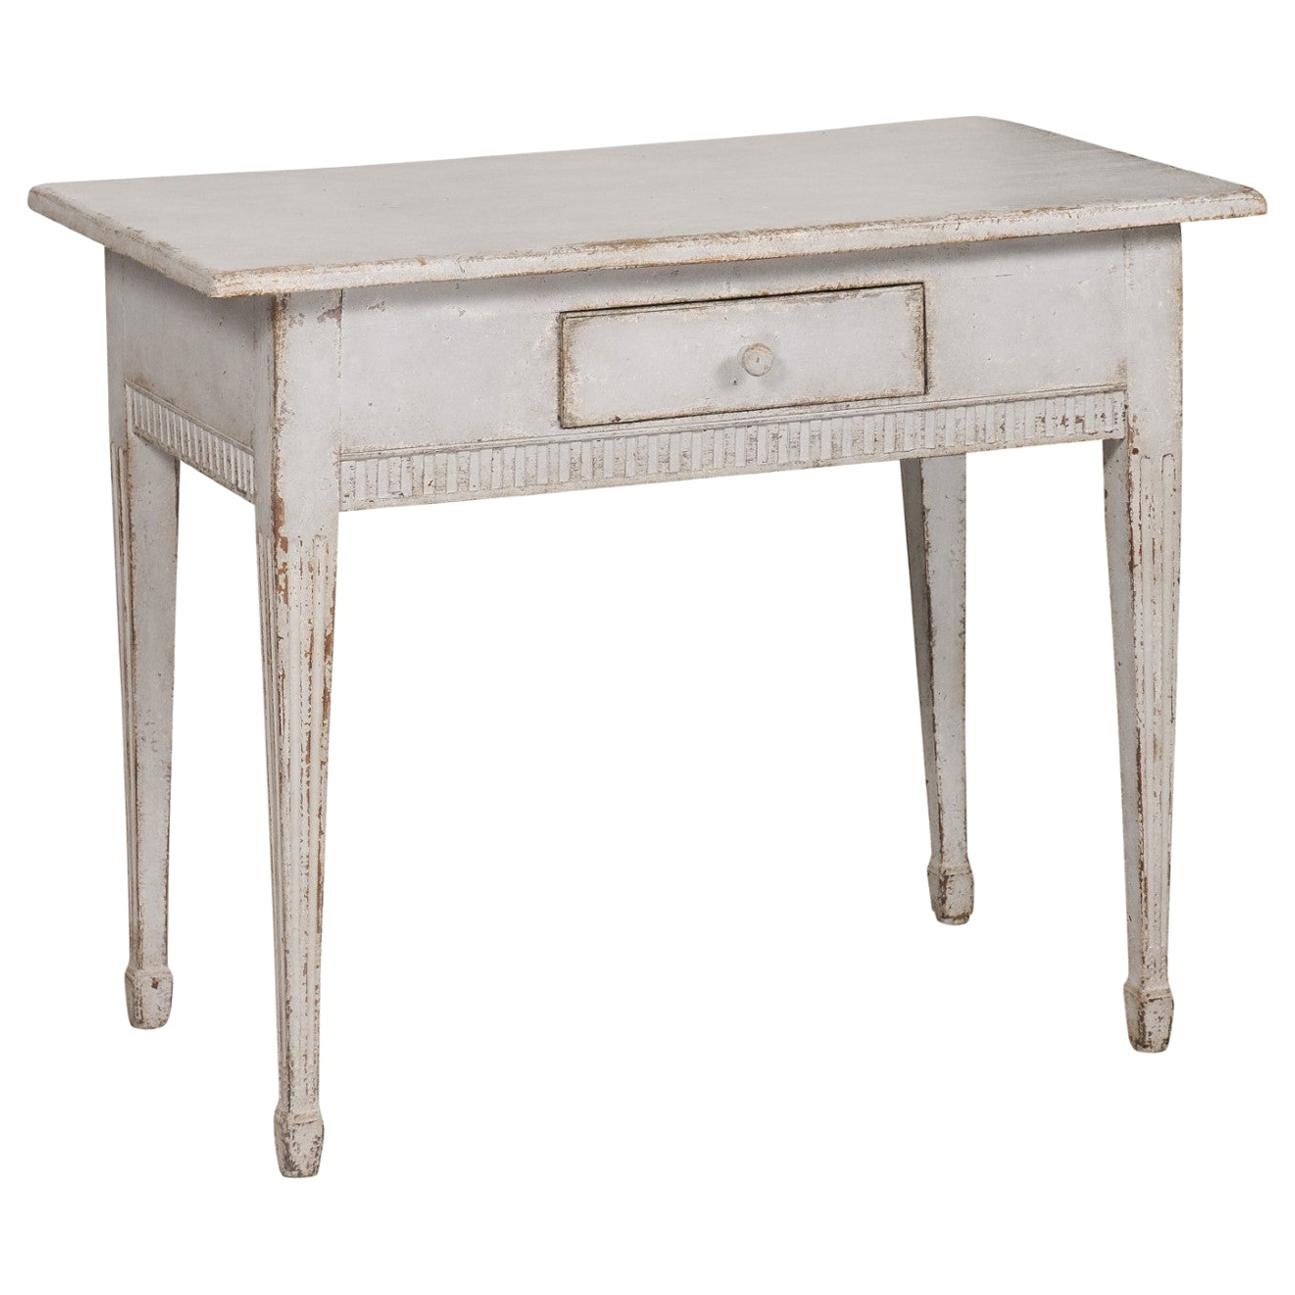 Swedish Gustavian Period 1790s Freestanding Painted Console Table with Drawer